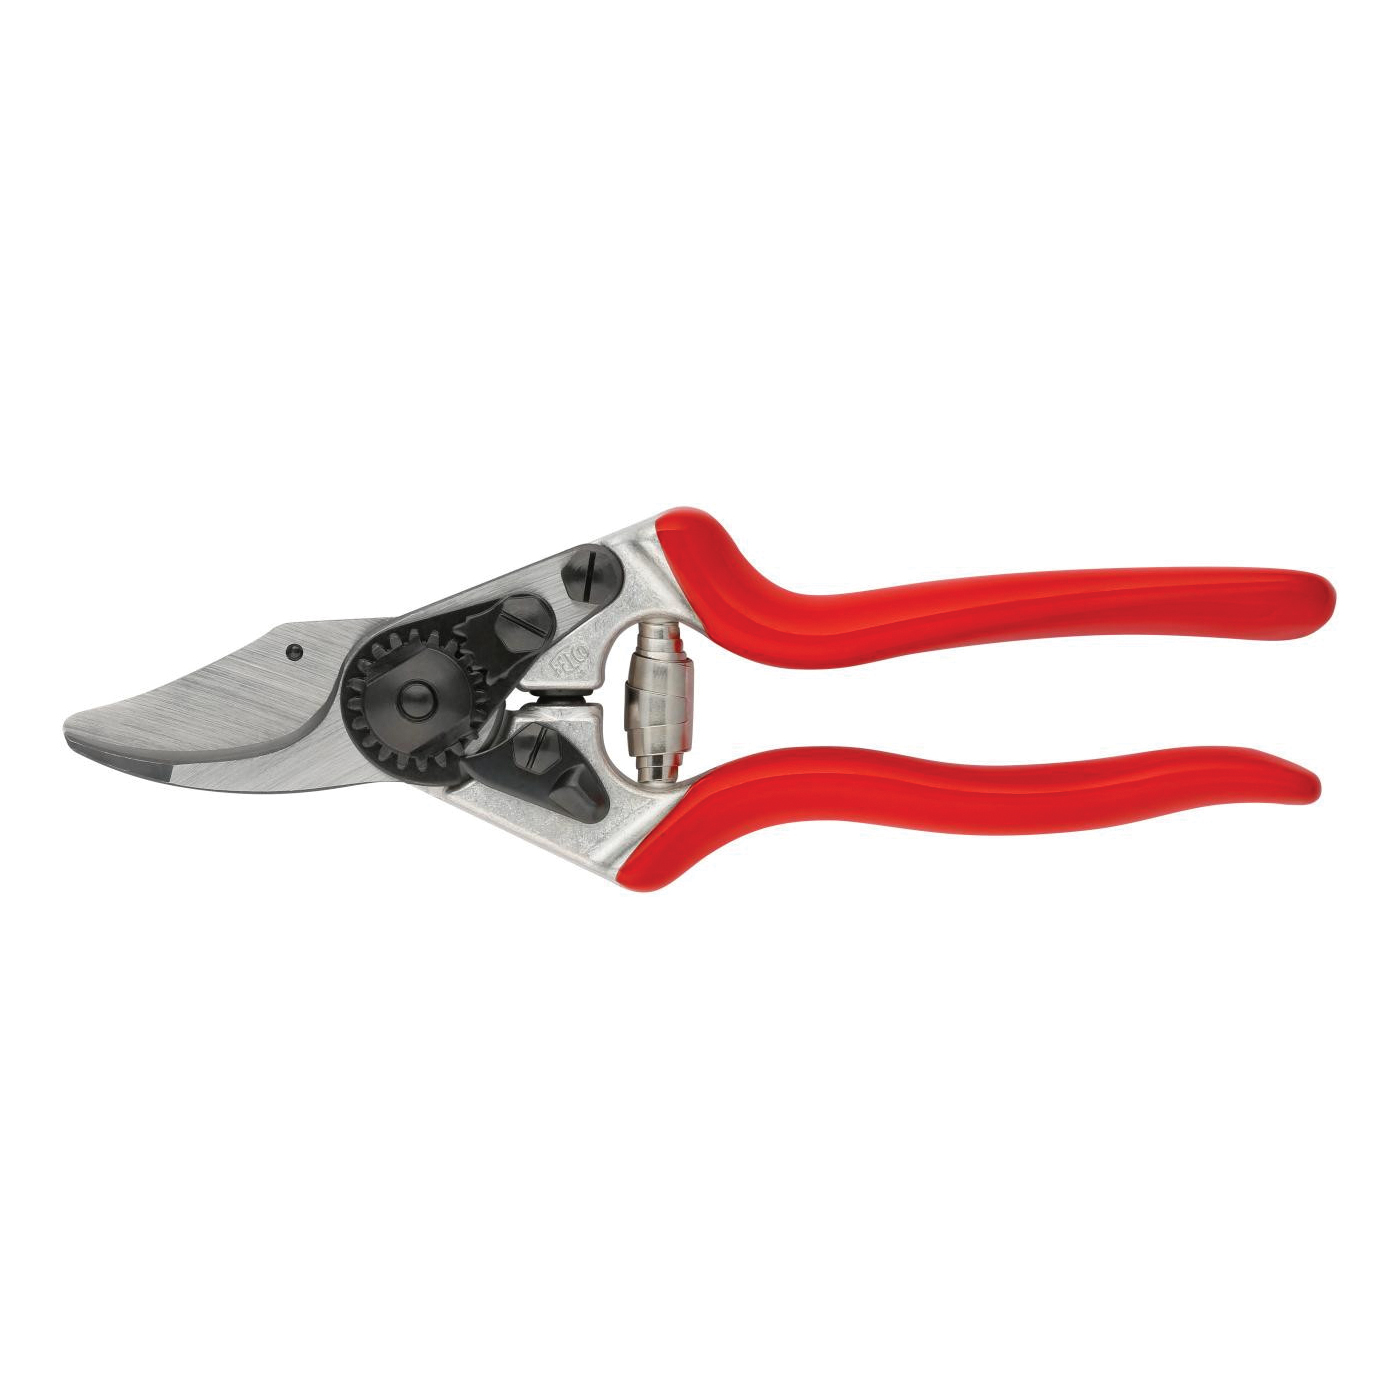 Felco F-6 Pruning Shear, 0.79 in Cutting Capacity, Steel Blade, Bypass Blade, Aluminum Handle - 1